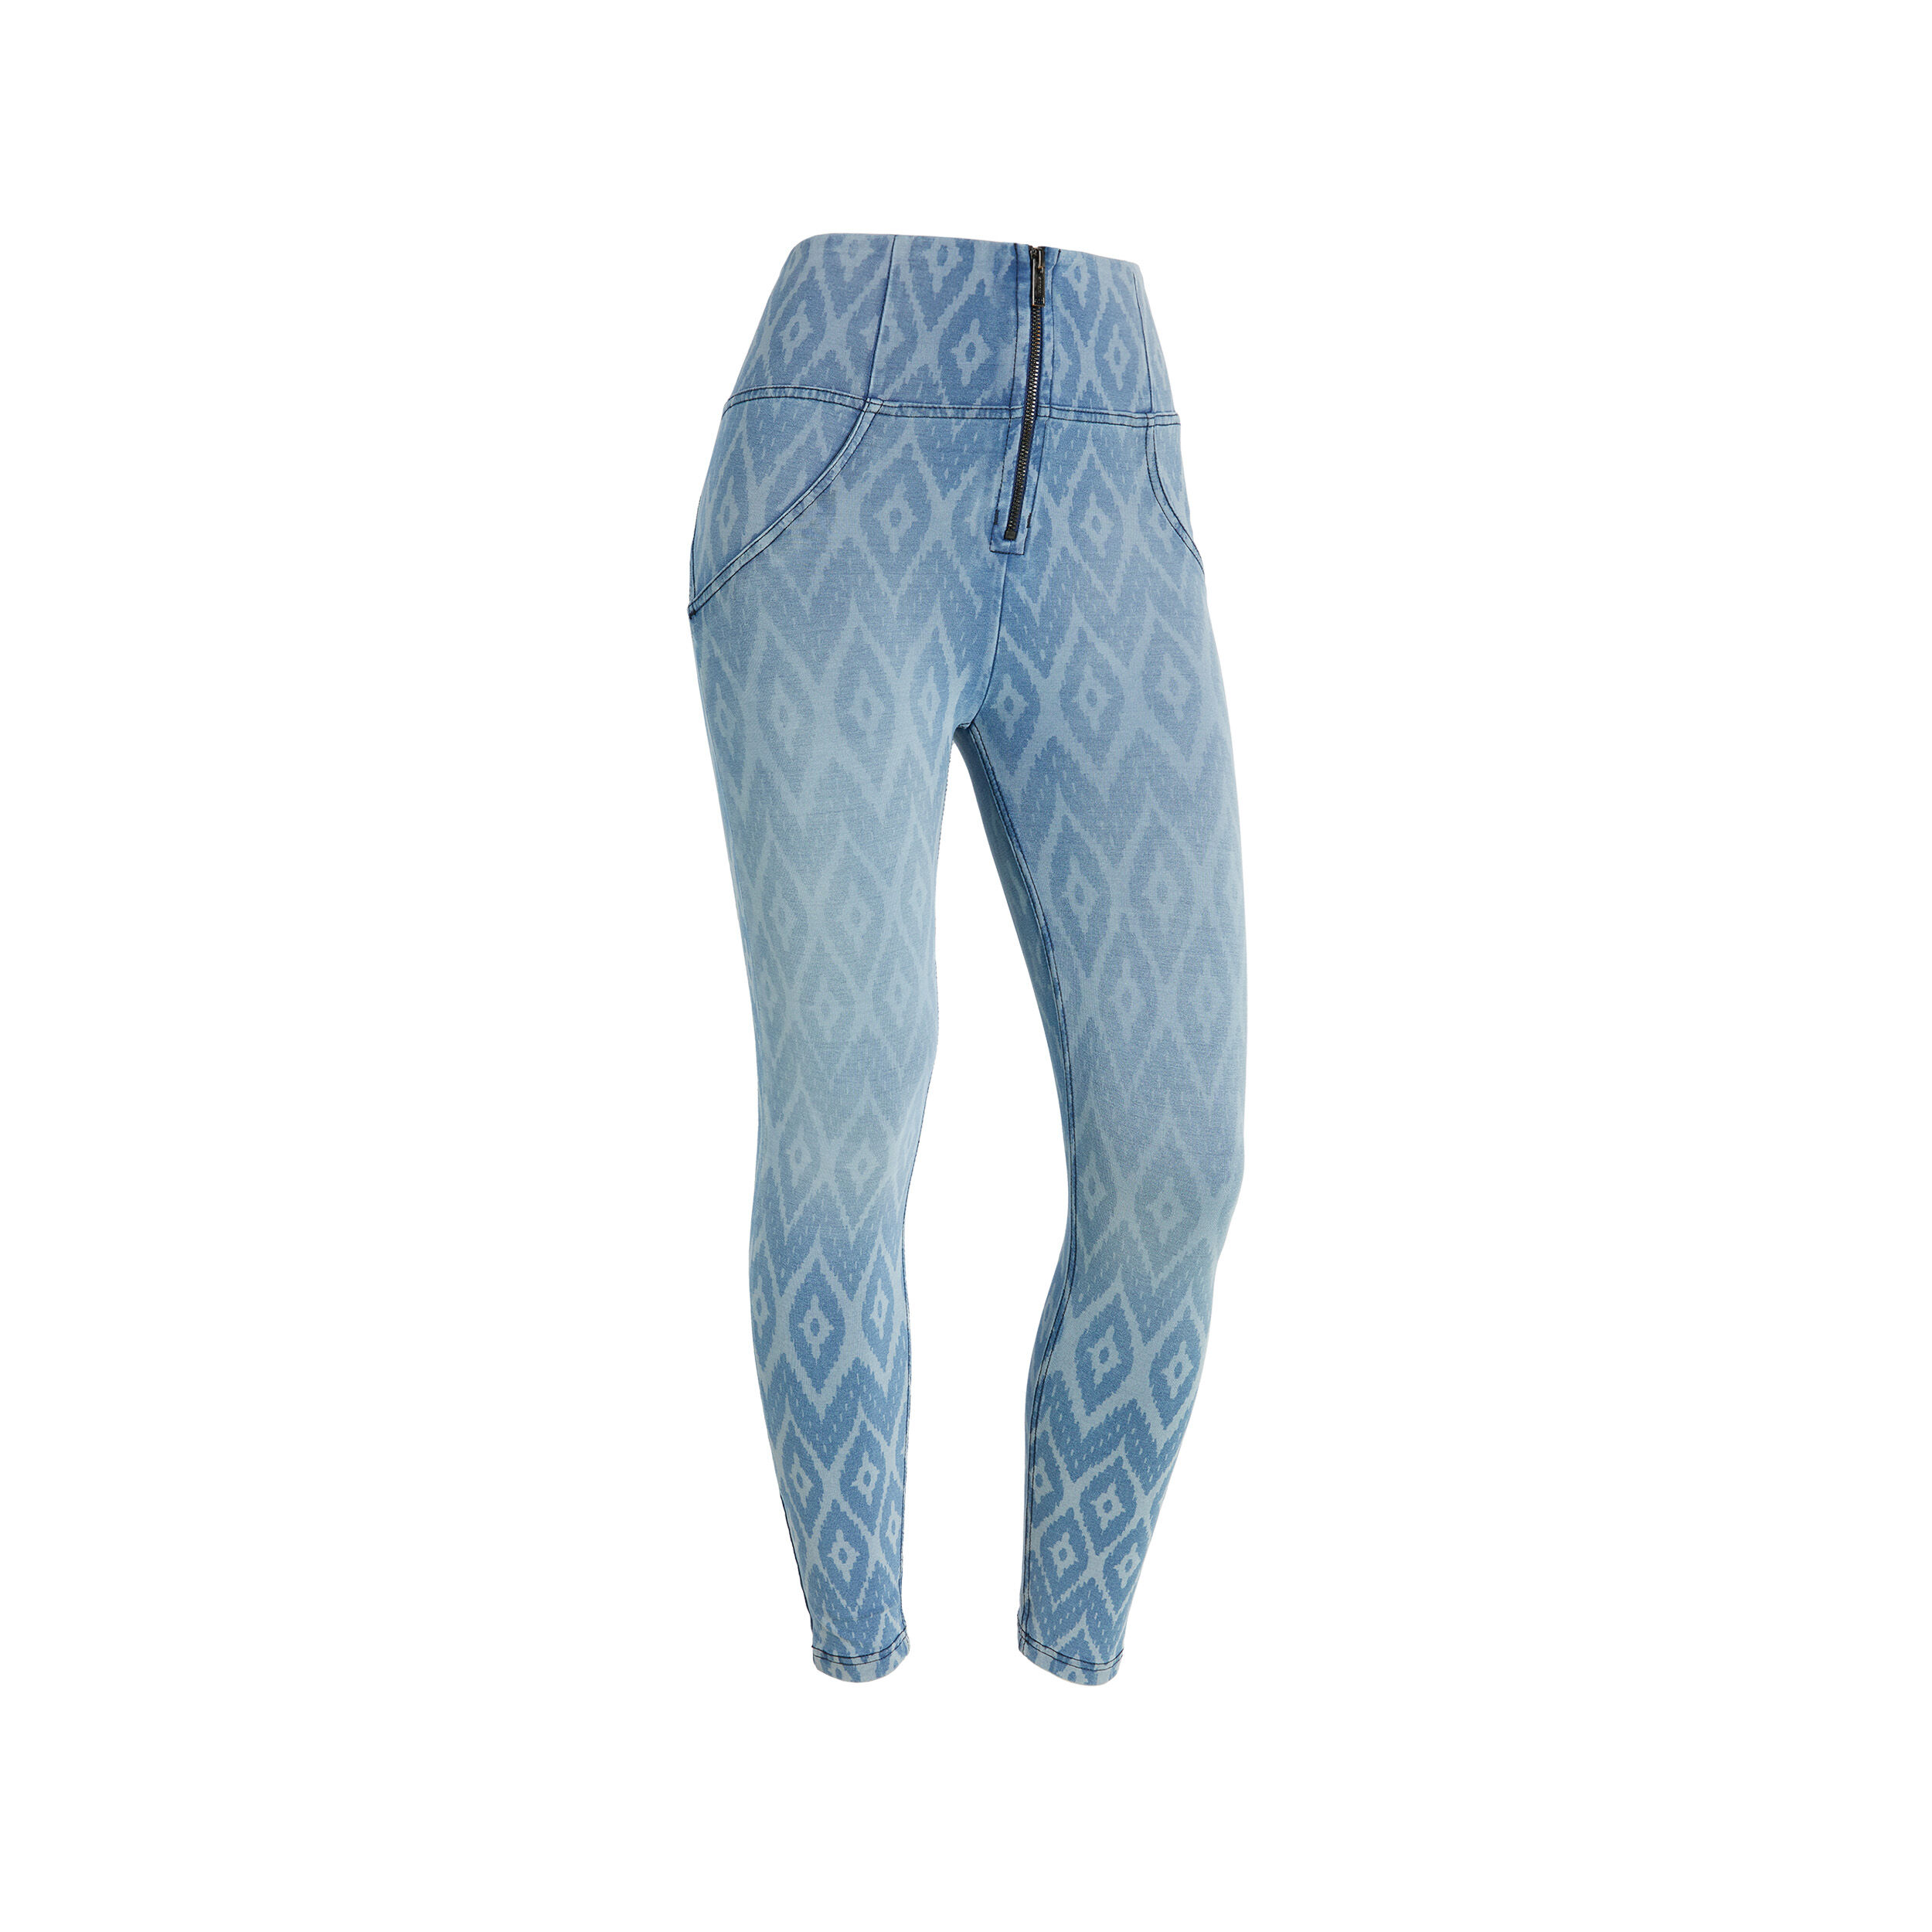 Freddy Jeggings push up WR.UP® vita alta stampa geometrica all over Den.Blue Aop Ethn.Laser Blu S. Donna Extra Small